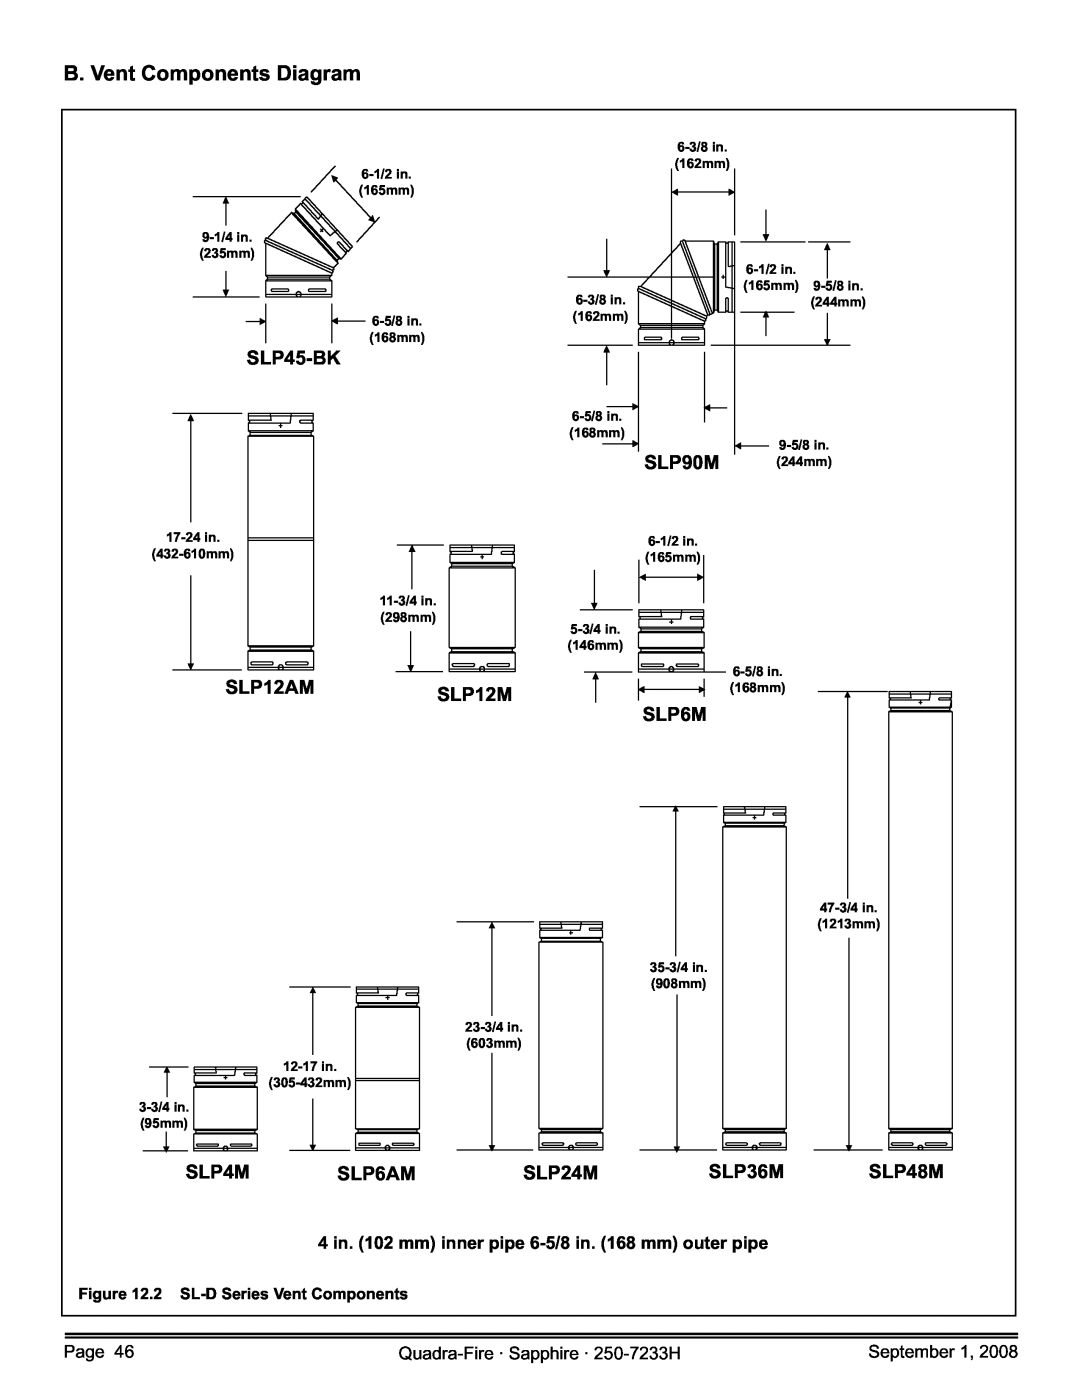 Hearth and Home Technologies 839-1440 B. Vent Components Diagram, SLP45-BK, SLP90M, SLP12AM, SLP12M, SLP4M, SLP6AM, SLP24M 